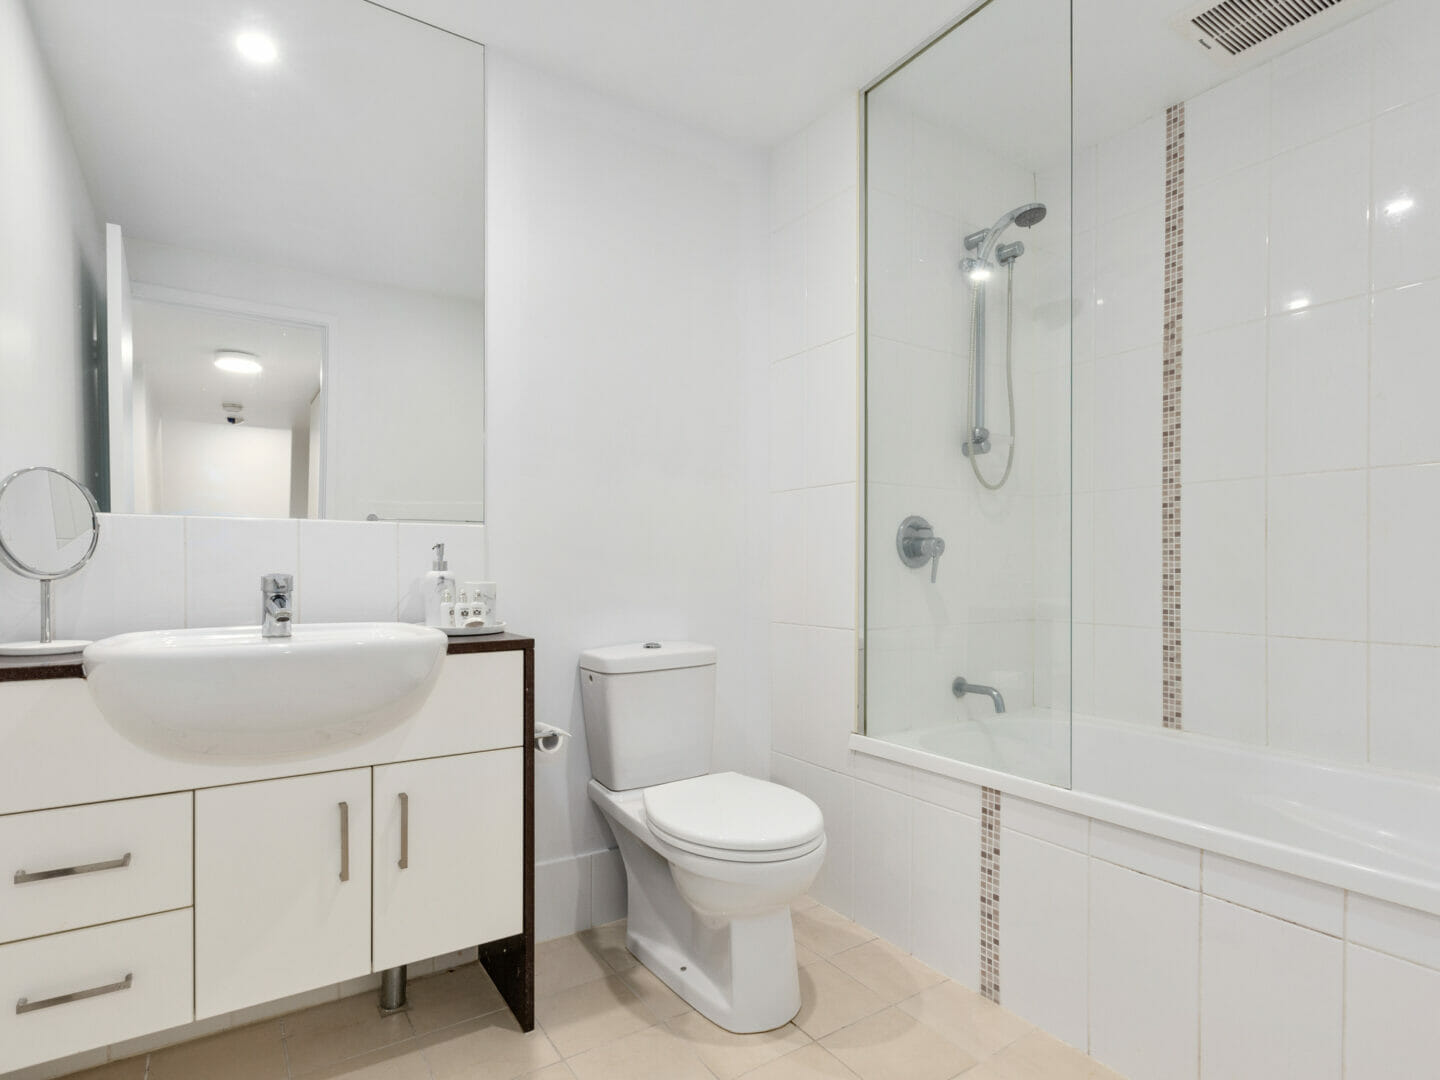 Bathroom with shower over bath, toilet and vanity basin